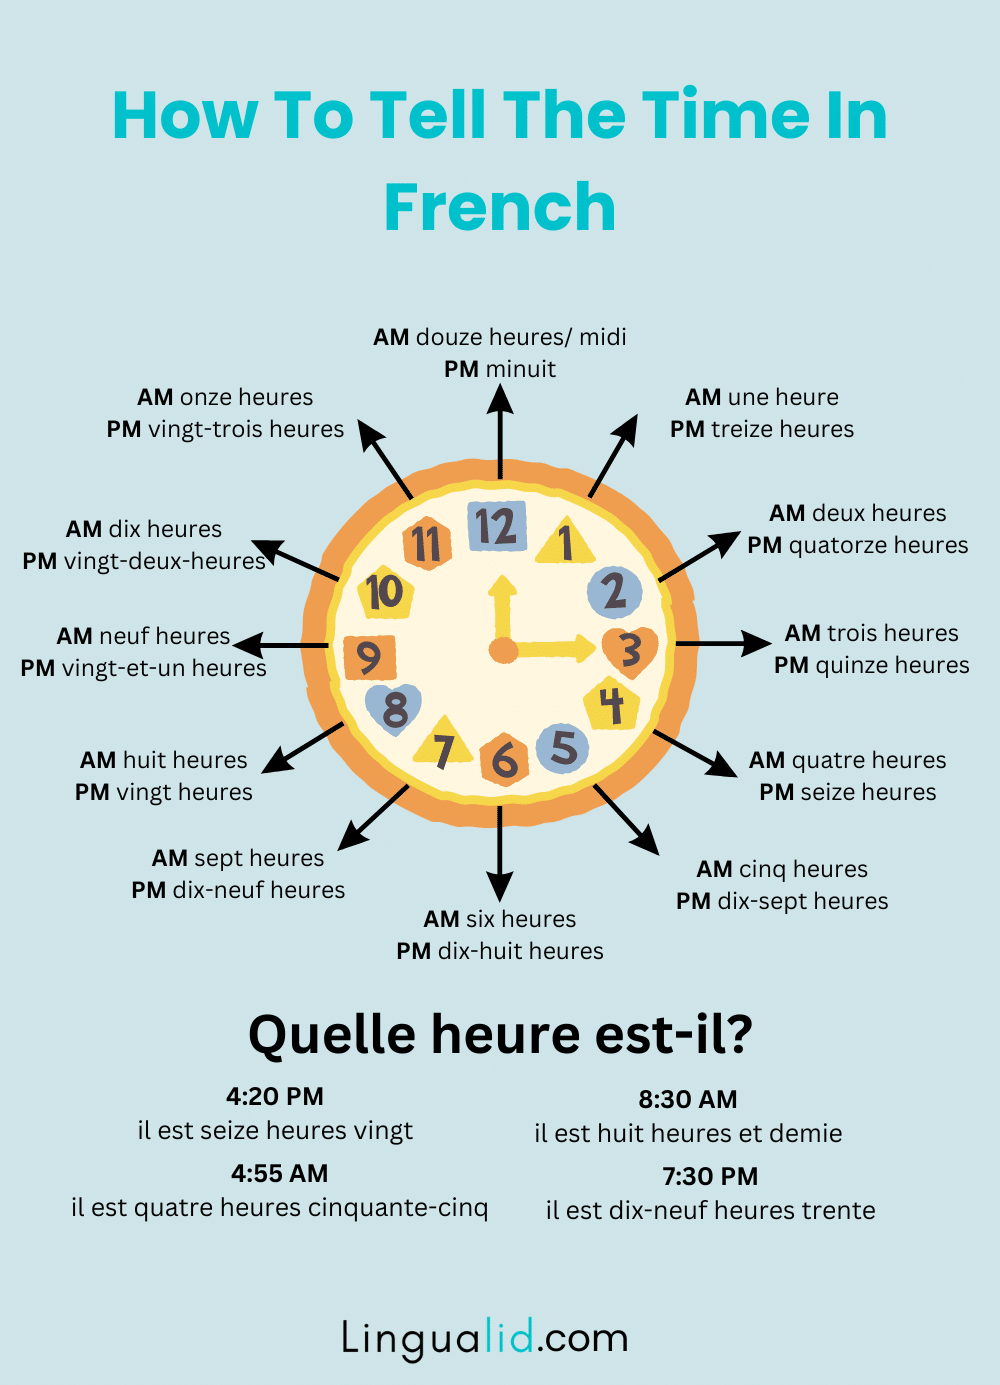 How To Tell The Time In French visual